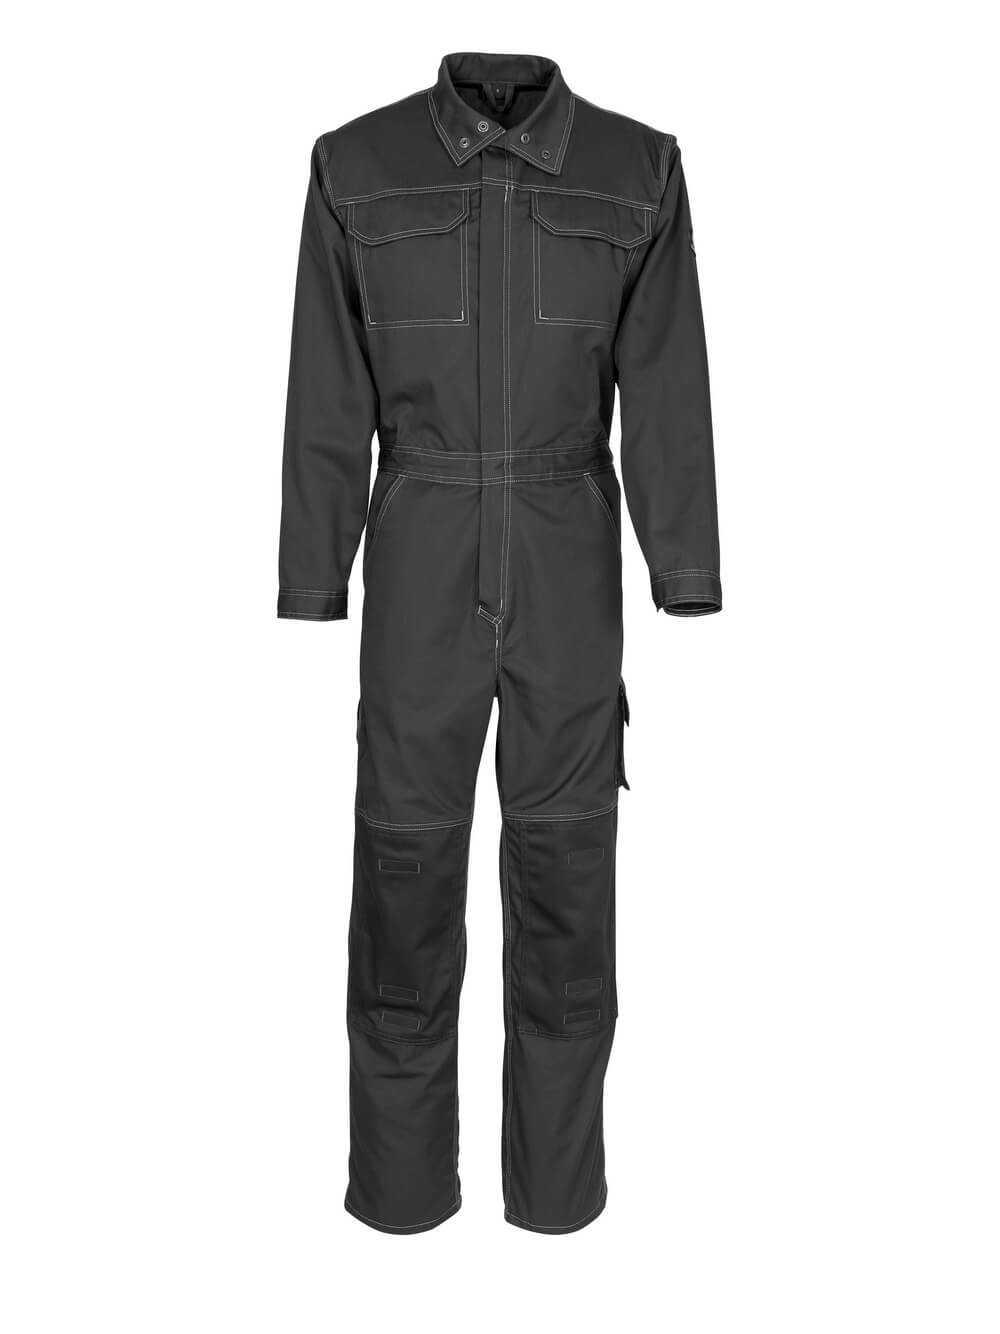 Mascot INDUSTRY  Akron Boilersuit with kneepad pockets 10519 black